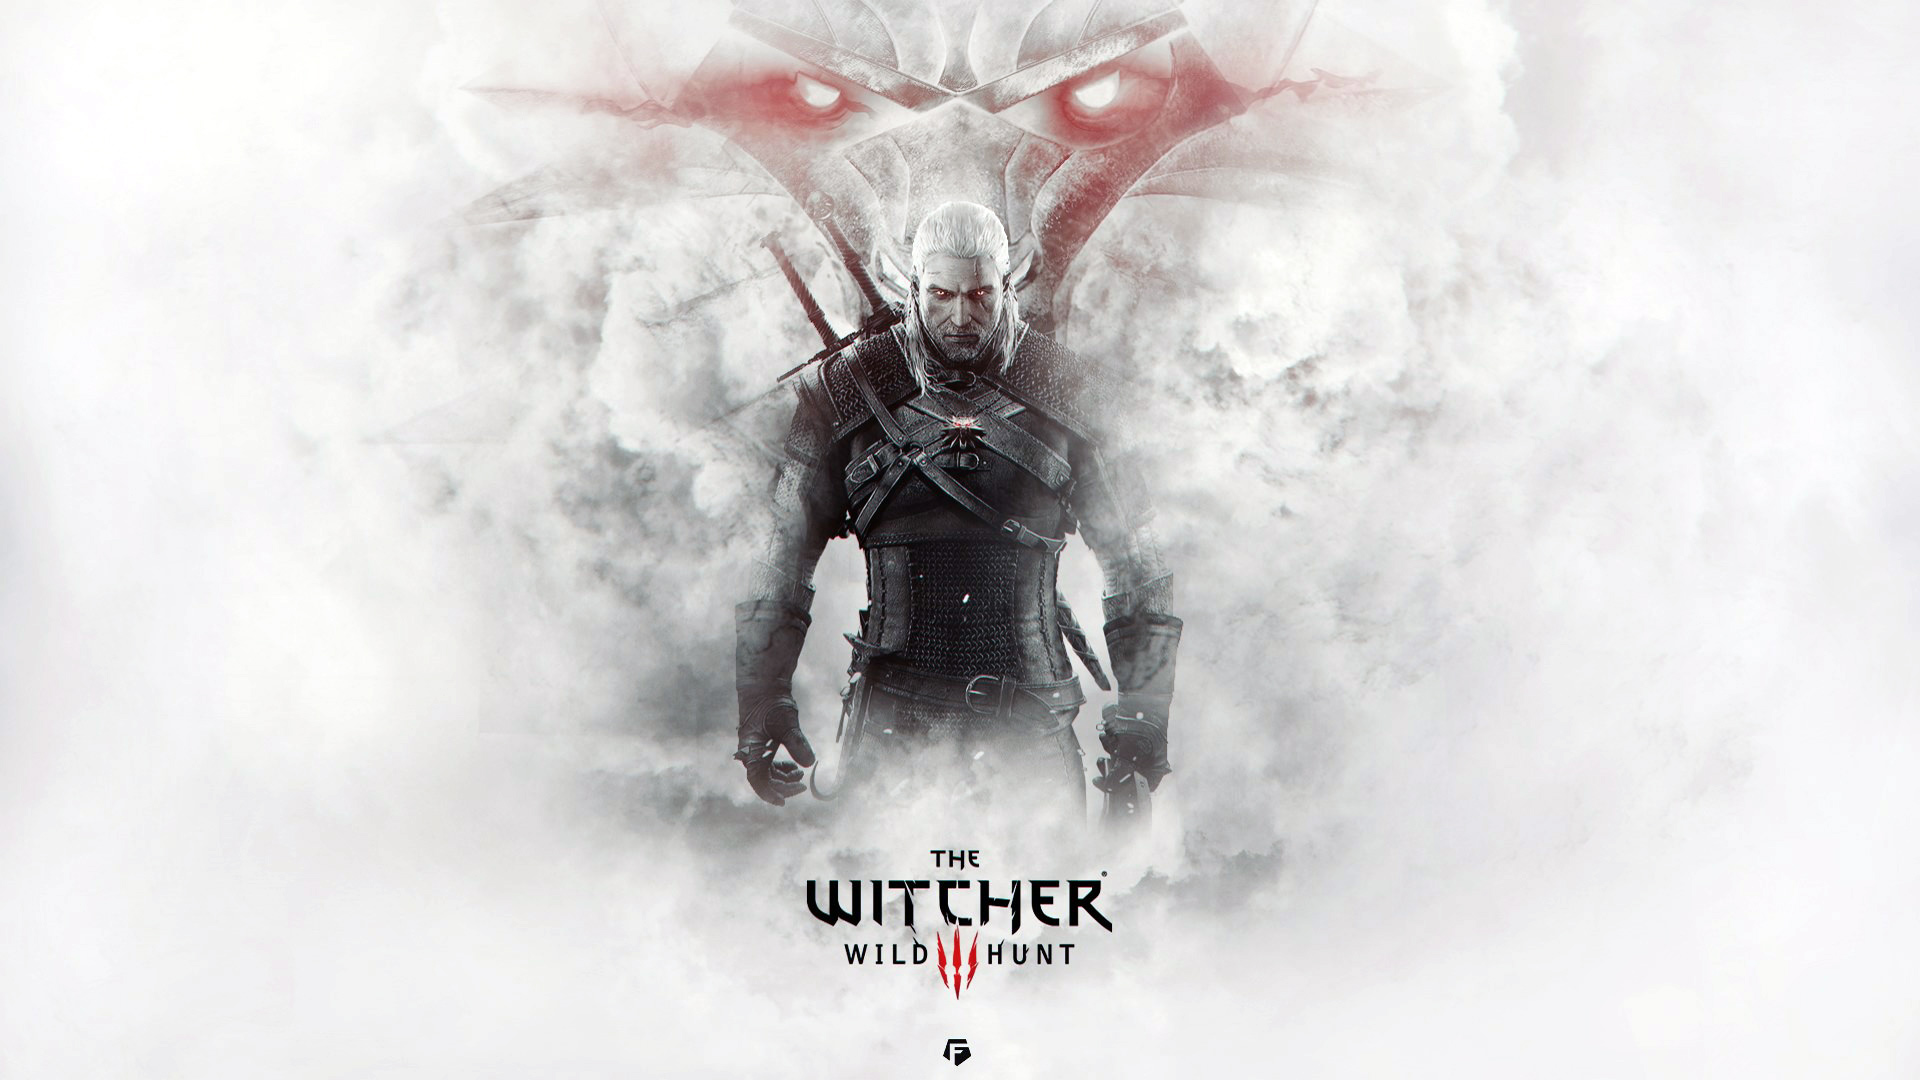 The Witcher Full HD Widescreen Wallpaper For